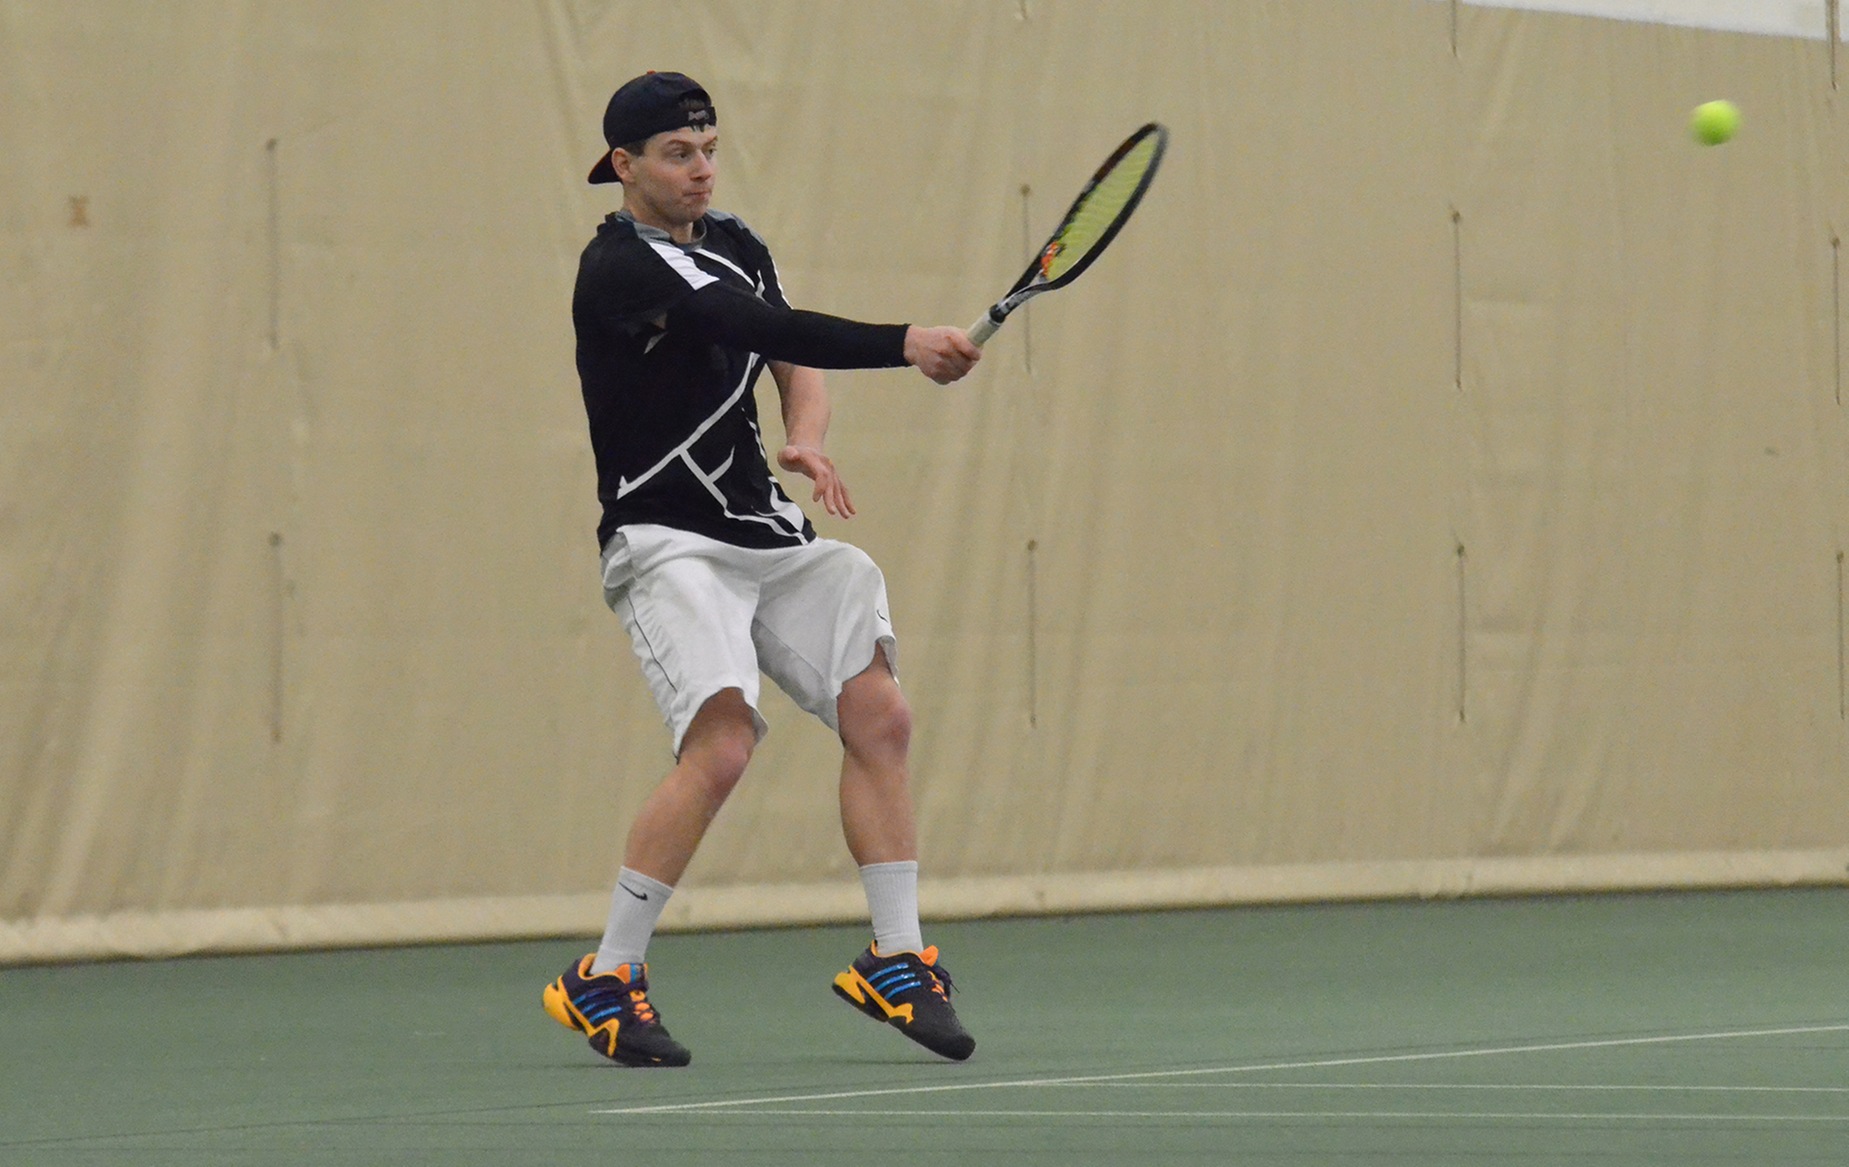 Men's Tennis Ends Season With Loss Against Transylvania (Ky.)